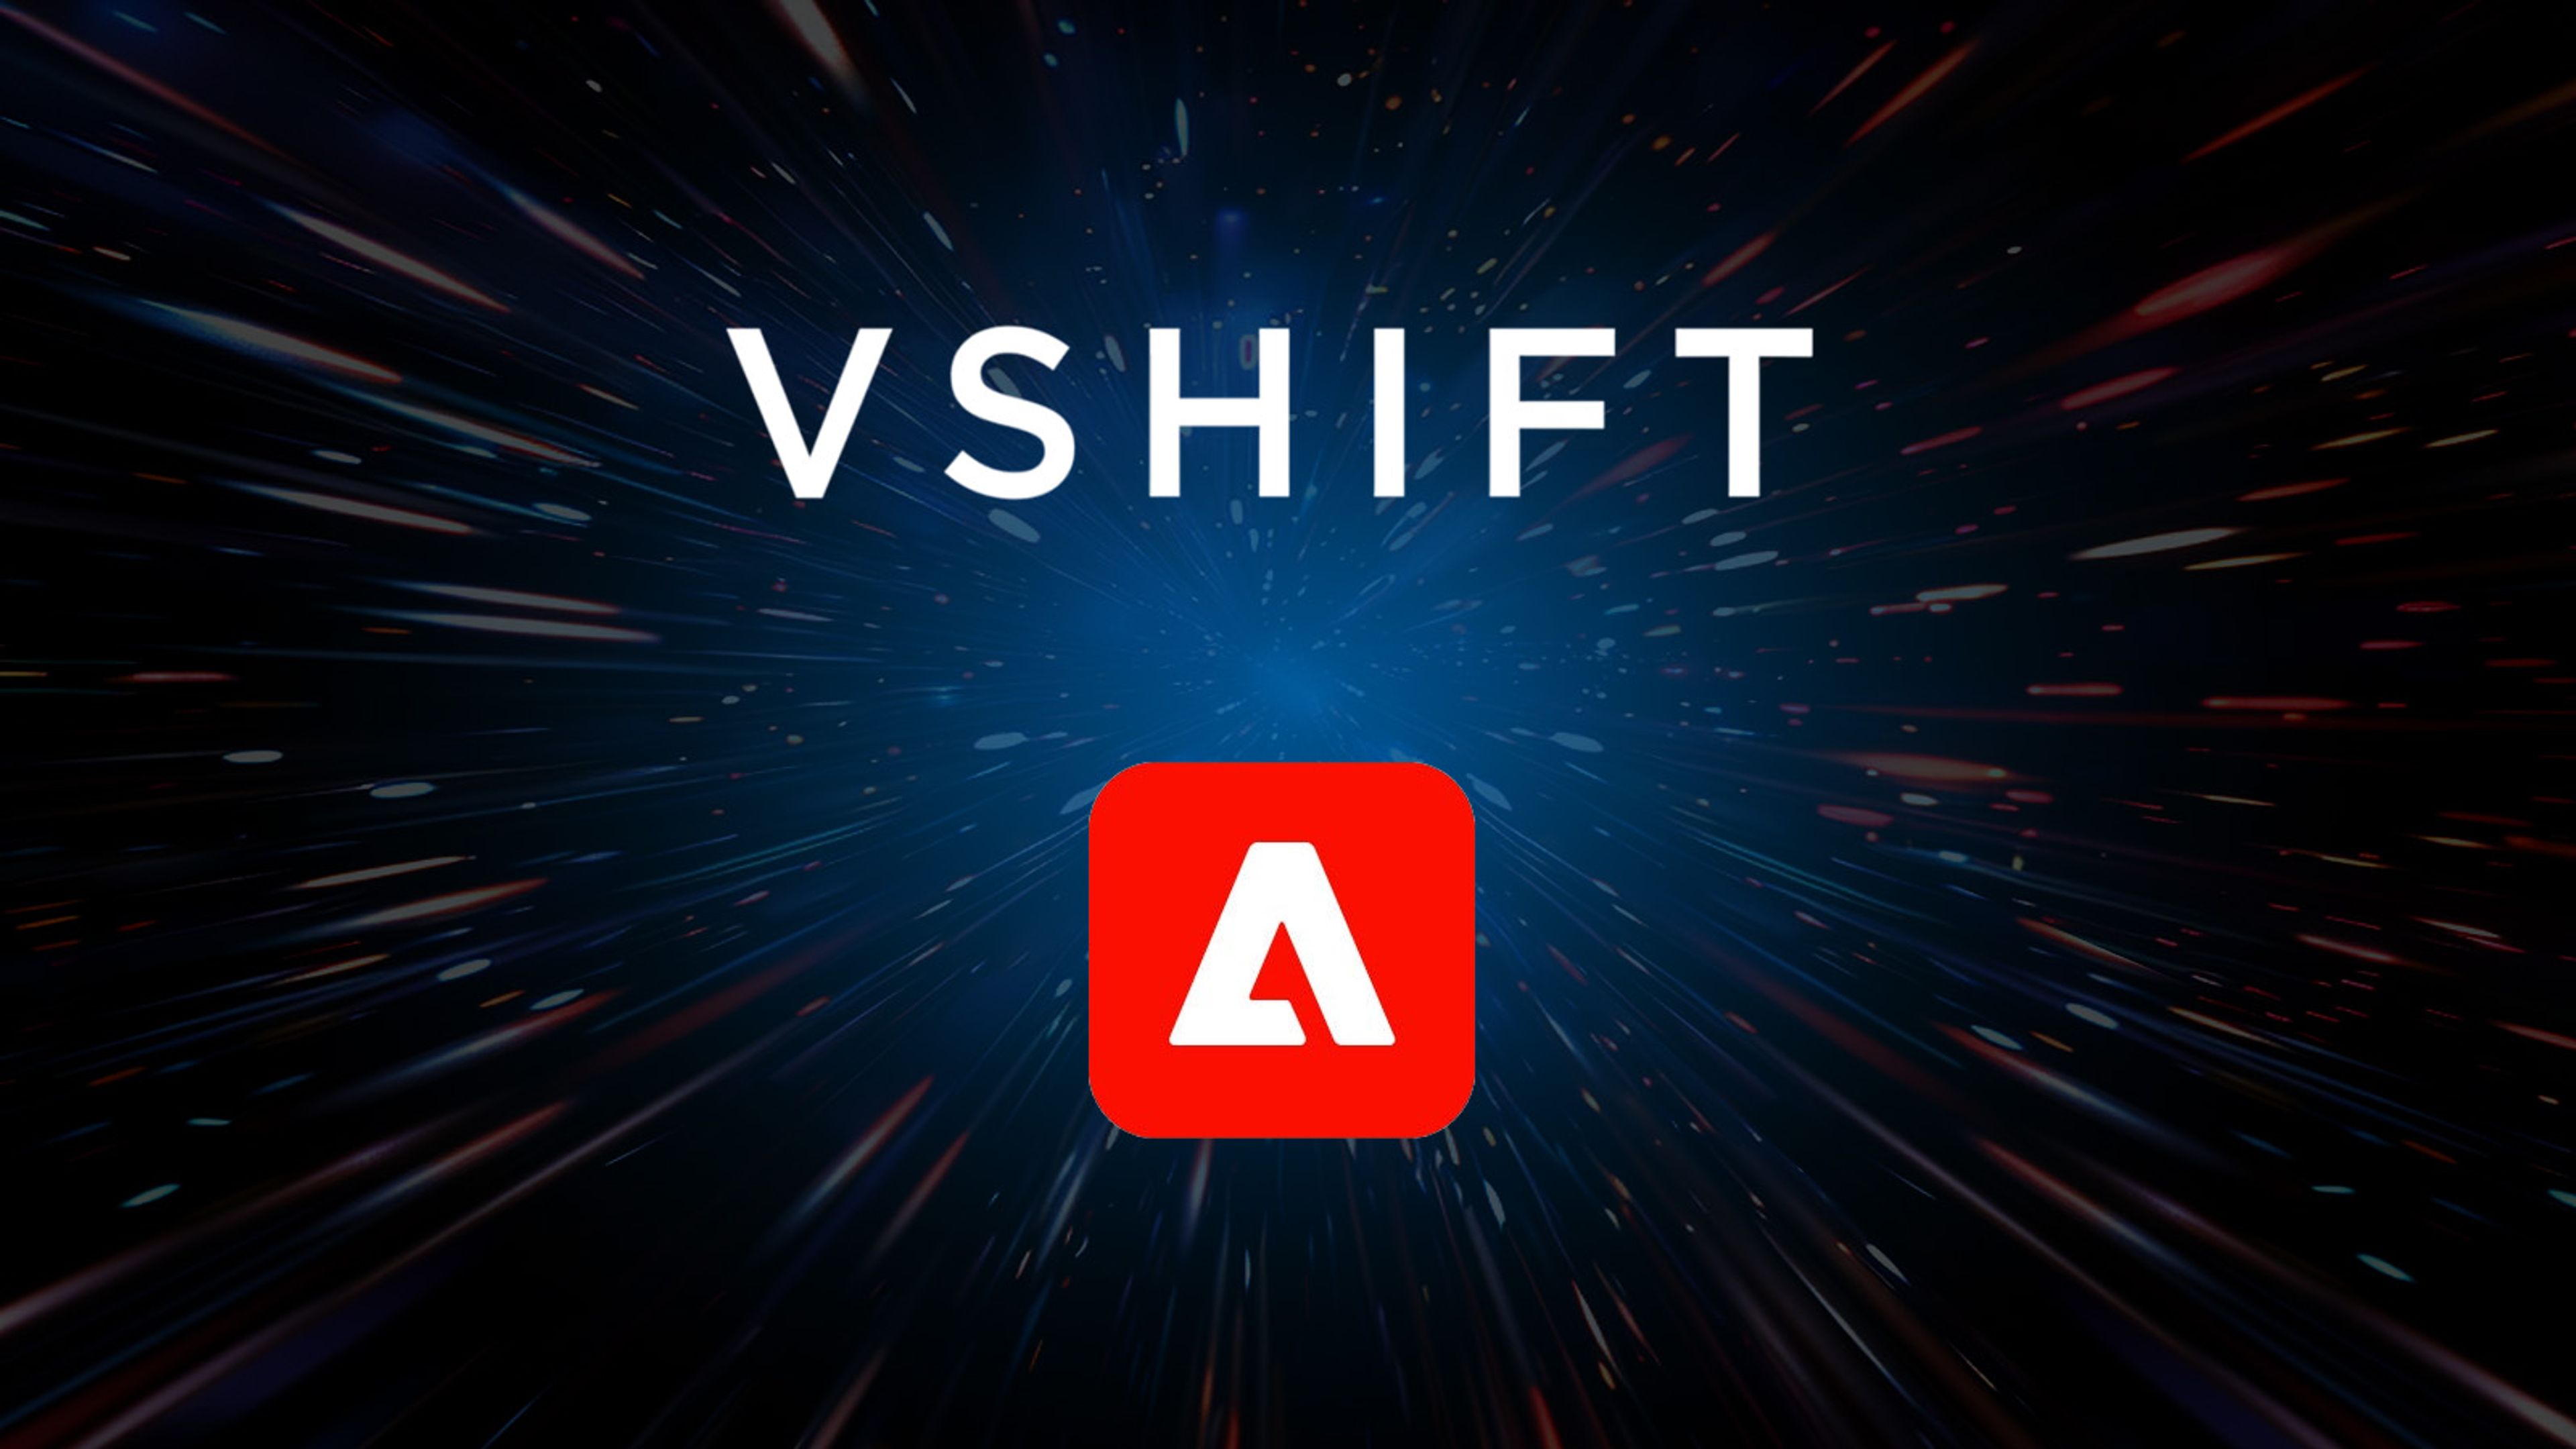 VShift logo and Adobe logo over a stream of warp trails in space